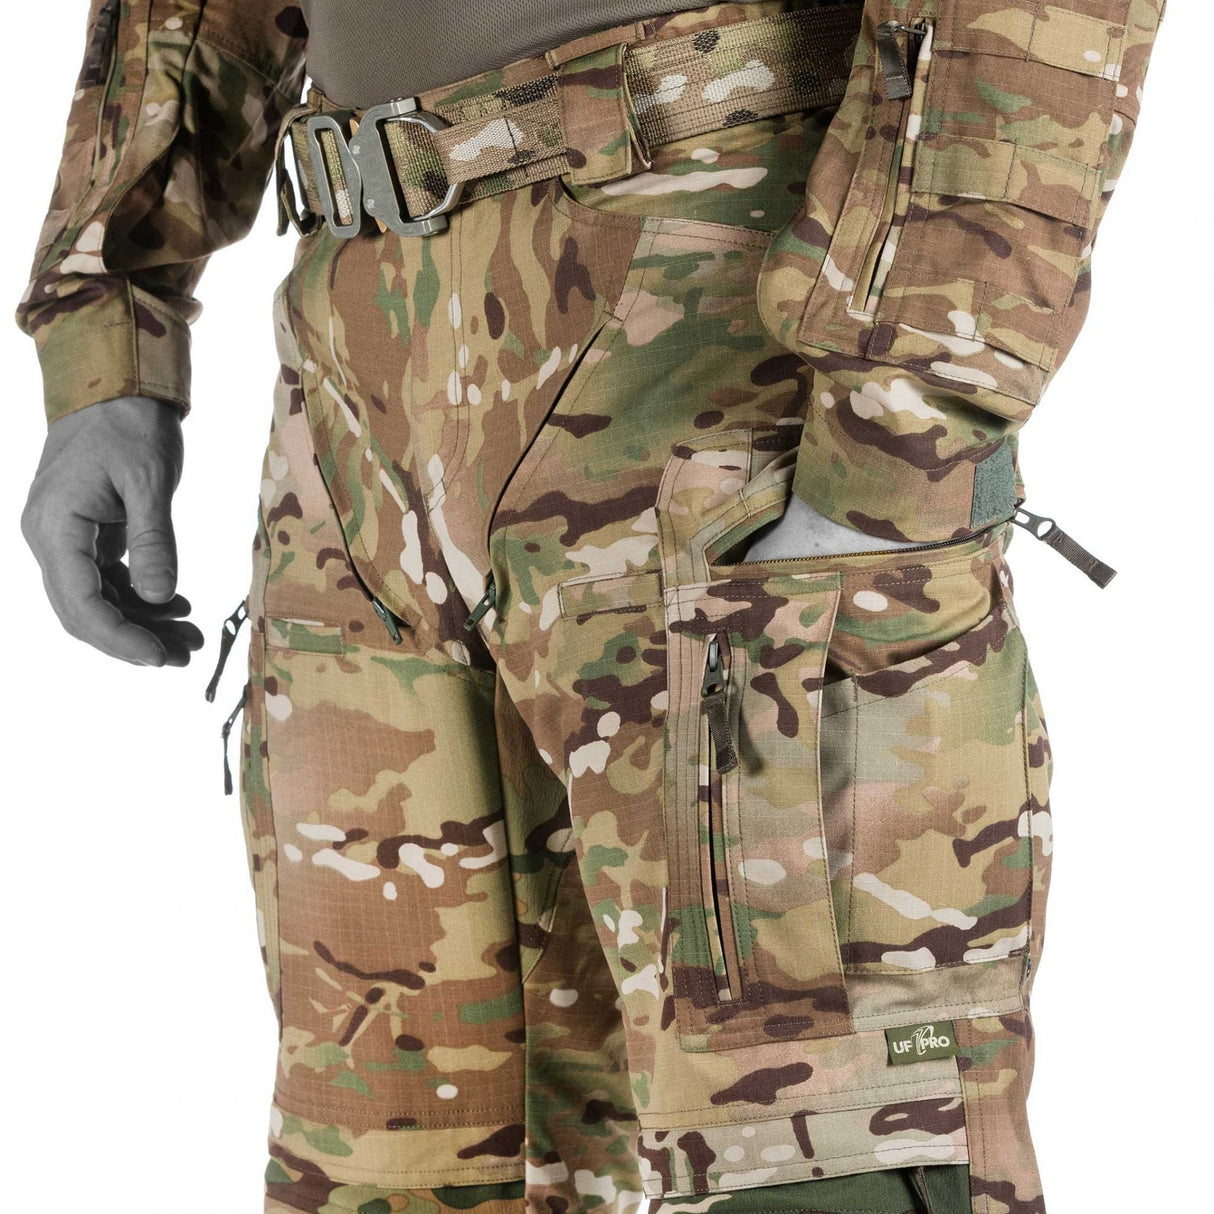 Tactical Performance Pants: Functionality, storage capacity, connectivity options.